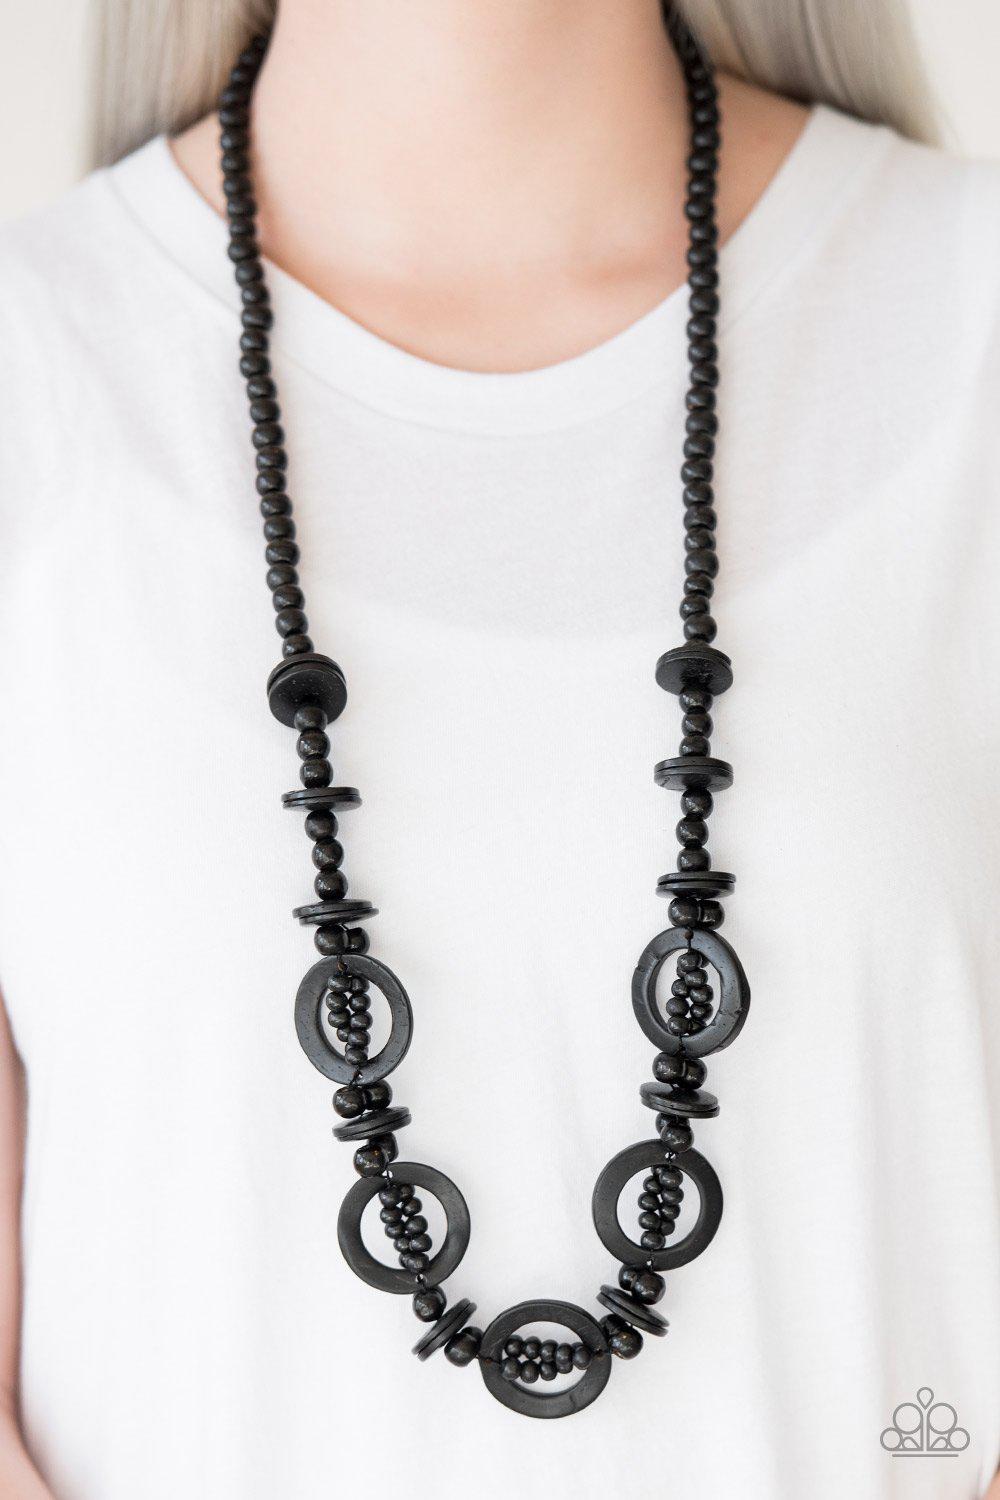 Tropical Heat Wave - Black $5 New release necklace/earrings online at  www.andreajewelrybling.com | Paparazzi accessories, Matching earrings, Wave  necklace